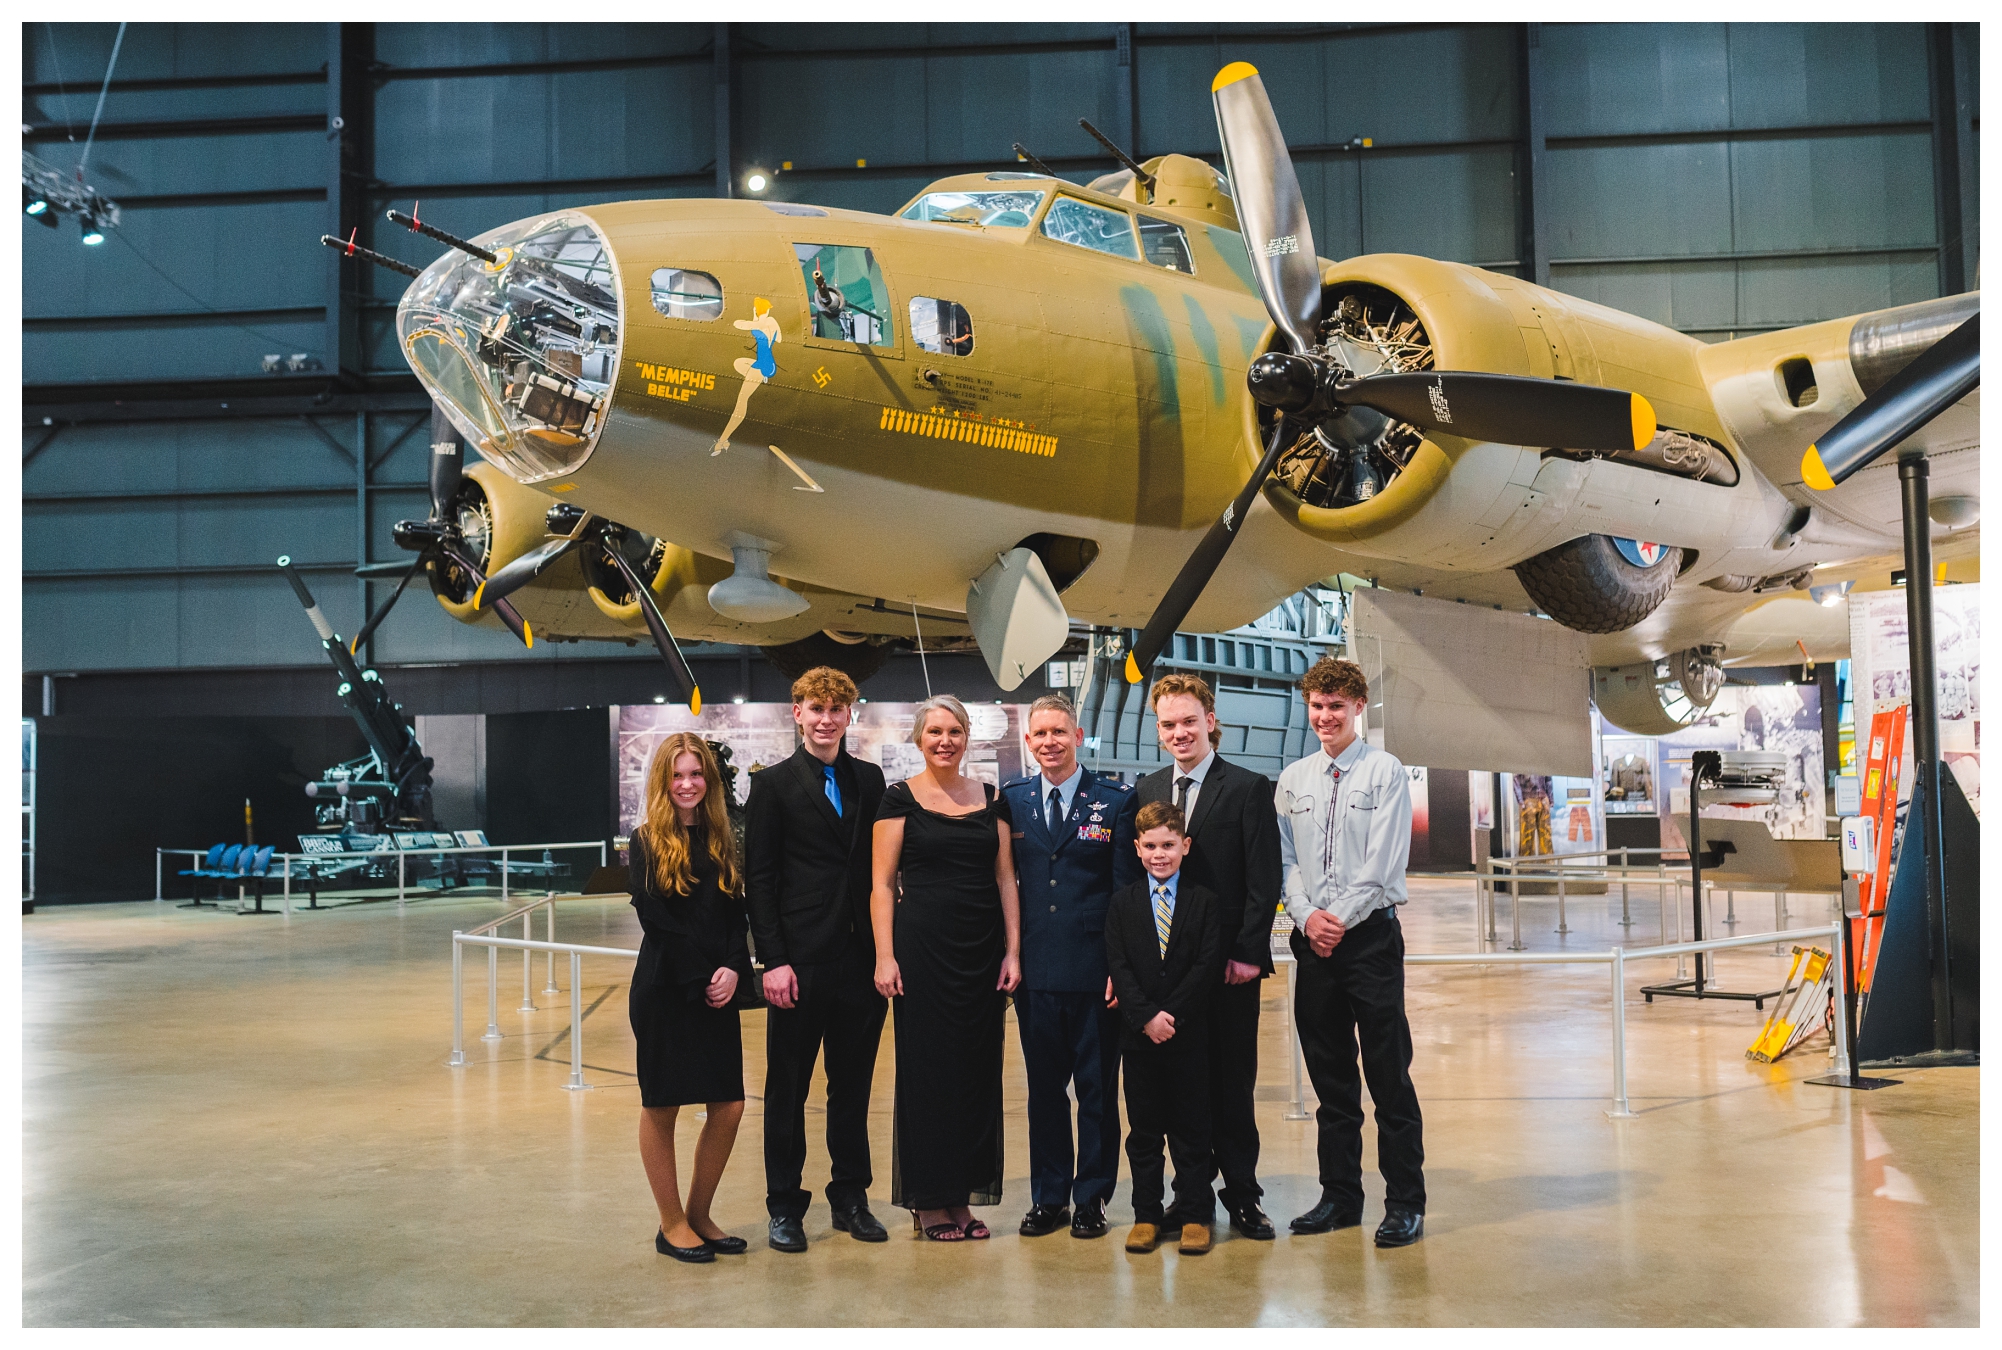 Family in front of airplane at Air Force Museum | Melissa Sheridan Photography